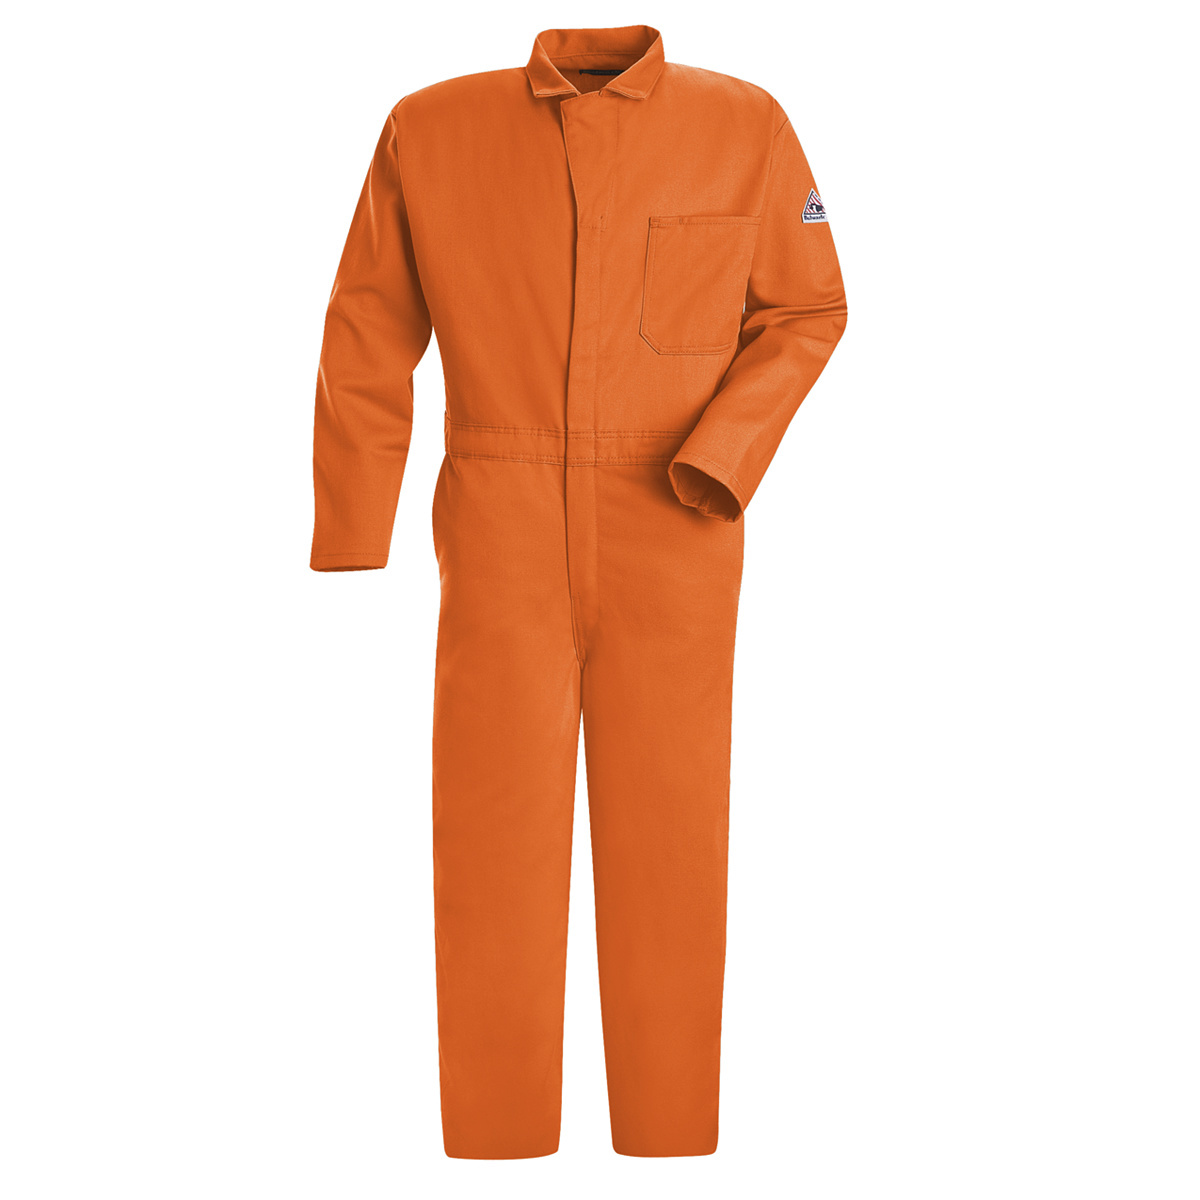 Bulwark® 44 Tall Orange EXCEL FR® Twill Cotton Flame Resistant Coveralls With Zipper Front Closure